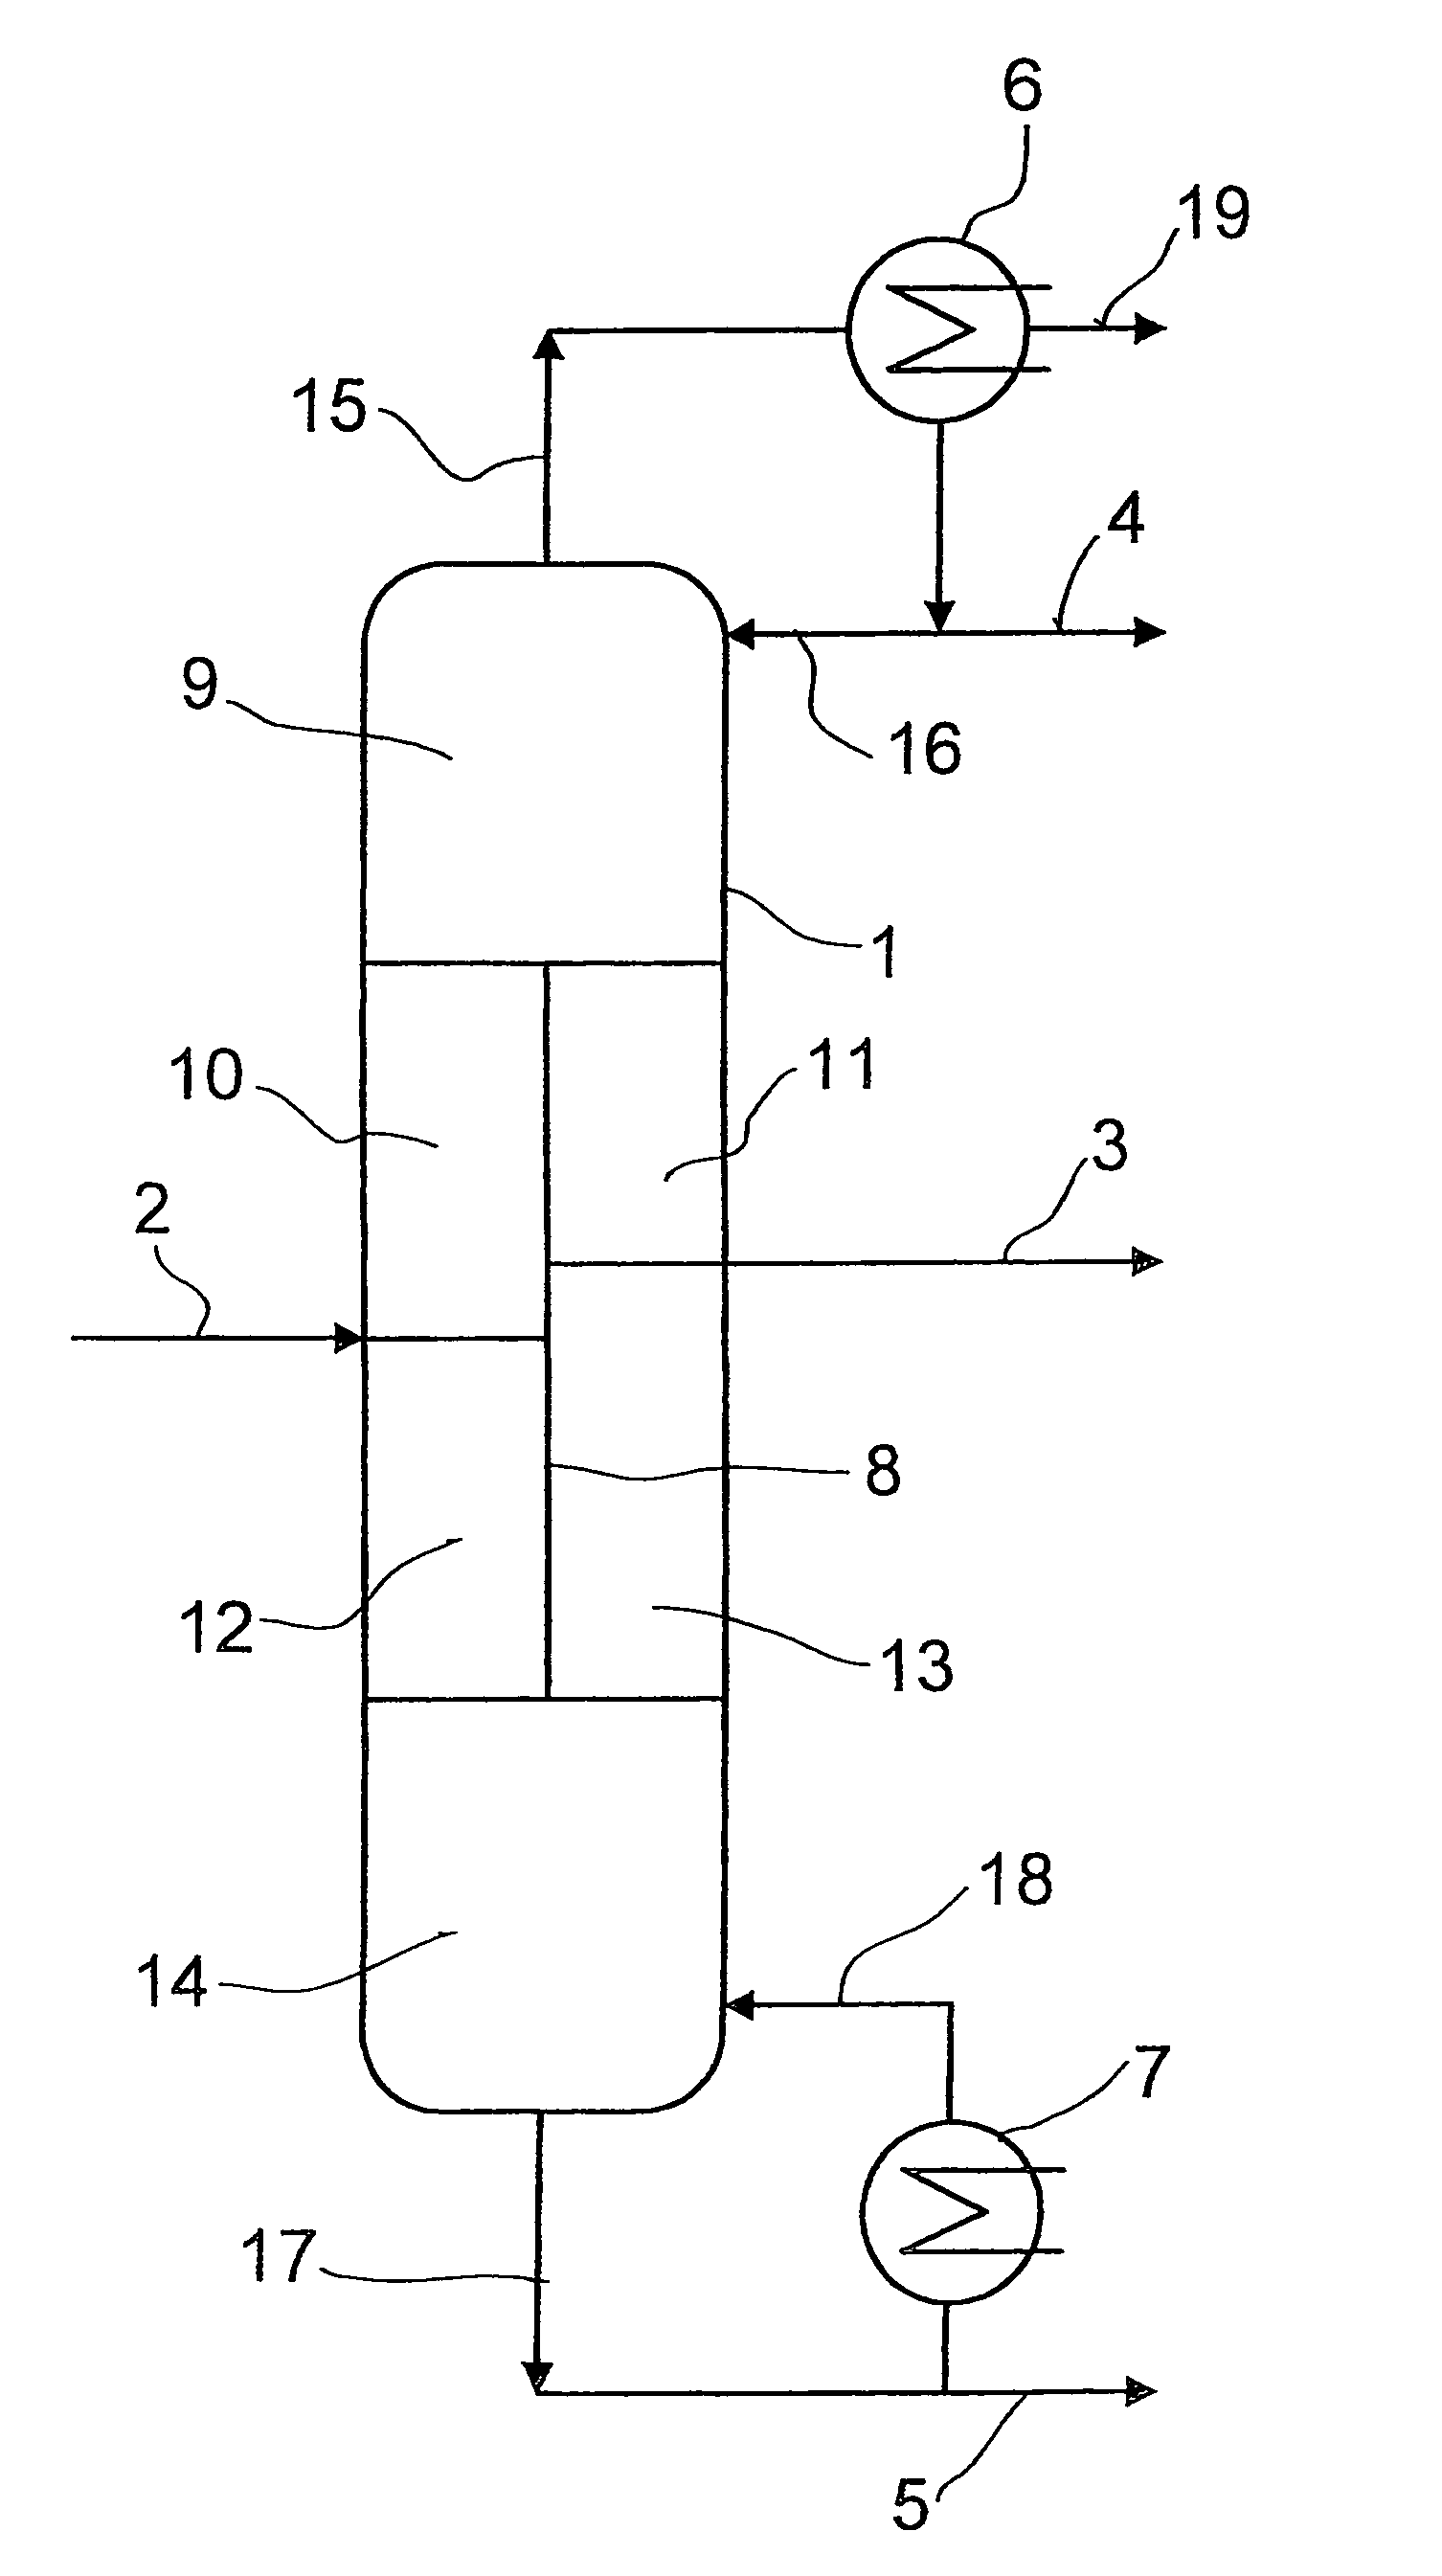 Method and device for obtaining 1,3 pure butadiene from 1,3 raw butadiene by distillation